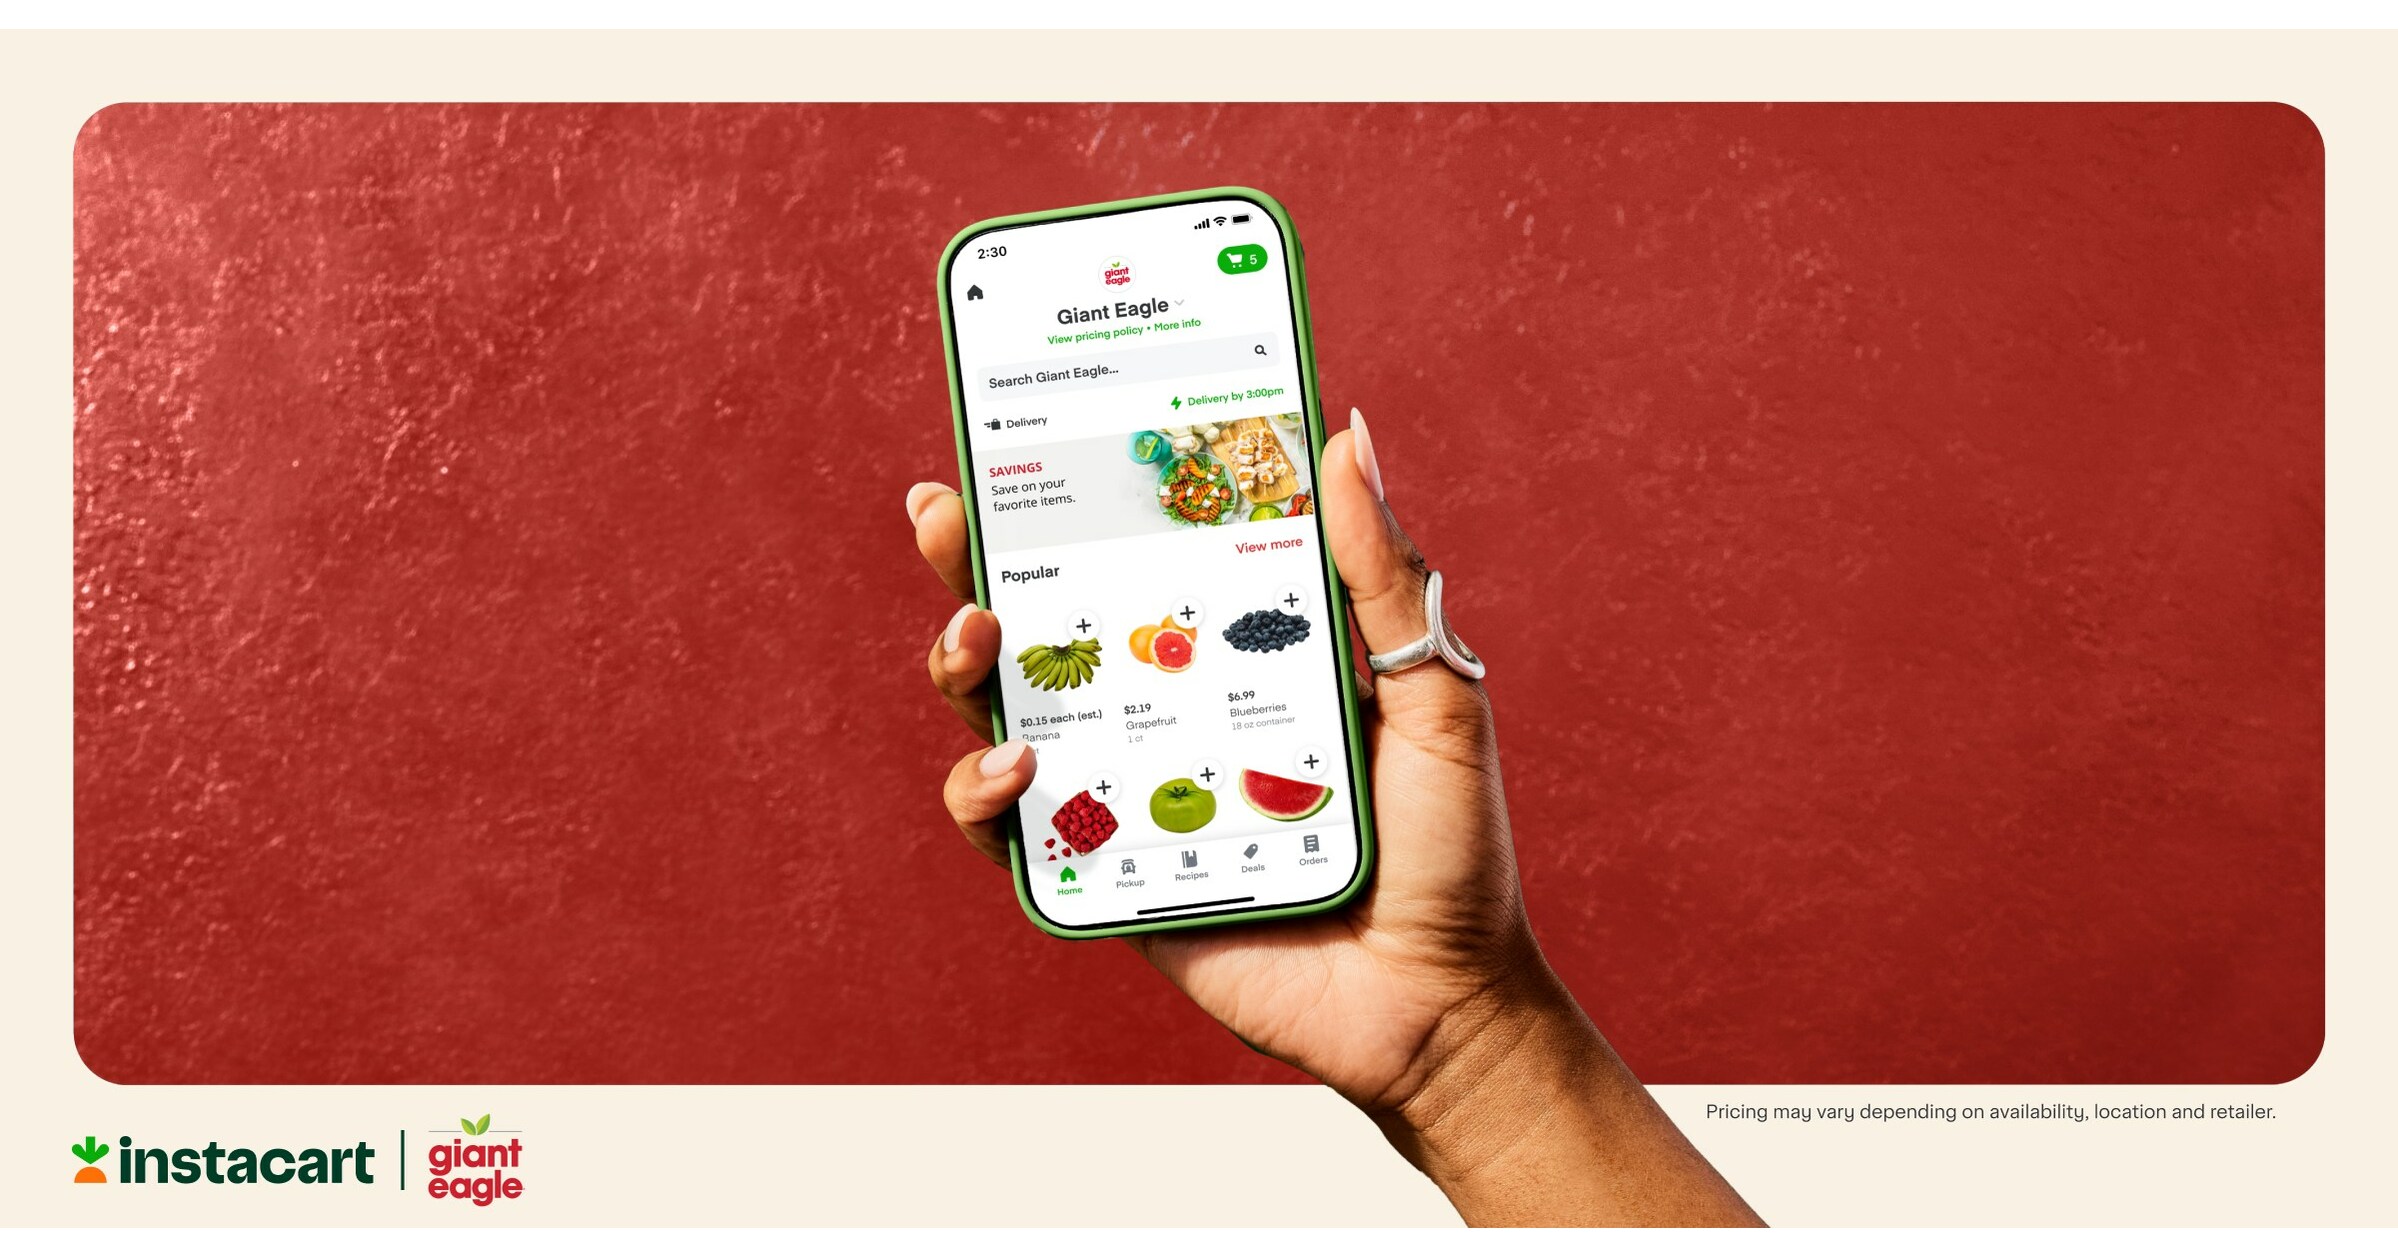 GIANT EAGLE PARTNERS WITH INSTACART TO POWER SAME-DAY DELIVERY